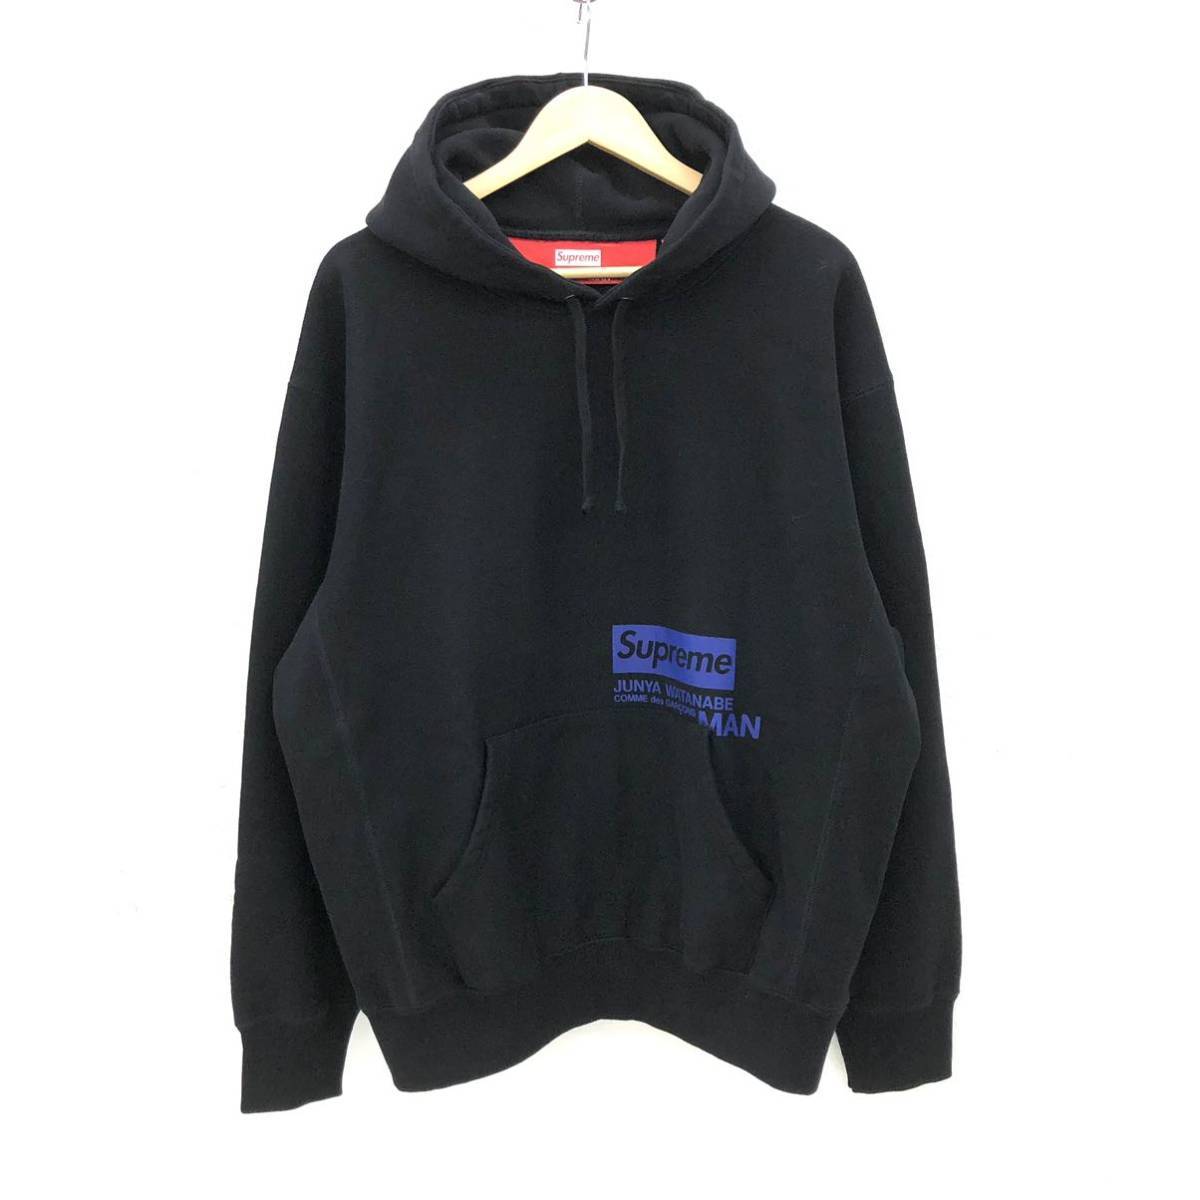 ∀ 21AW Supreme JUNYA WATANABE COMME des GARCONS MAN Hooded